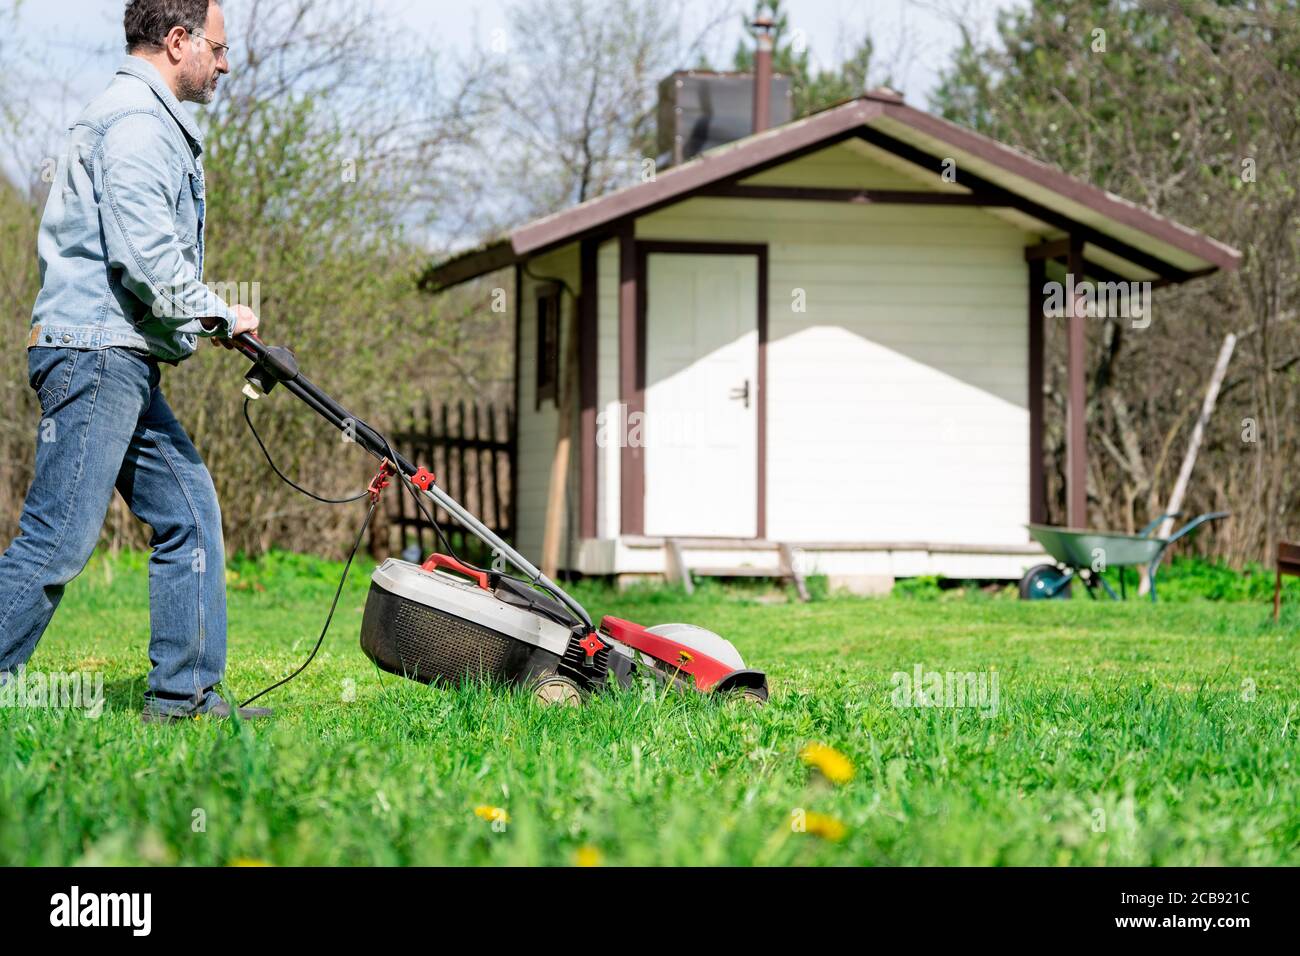 Man cutting grass with a lawn mower on the backyard Stock Photo